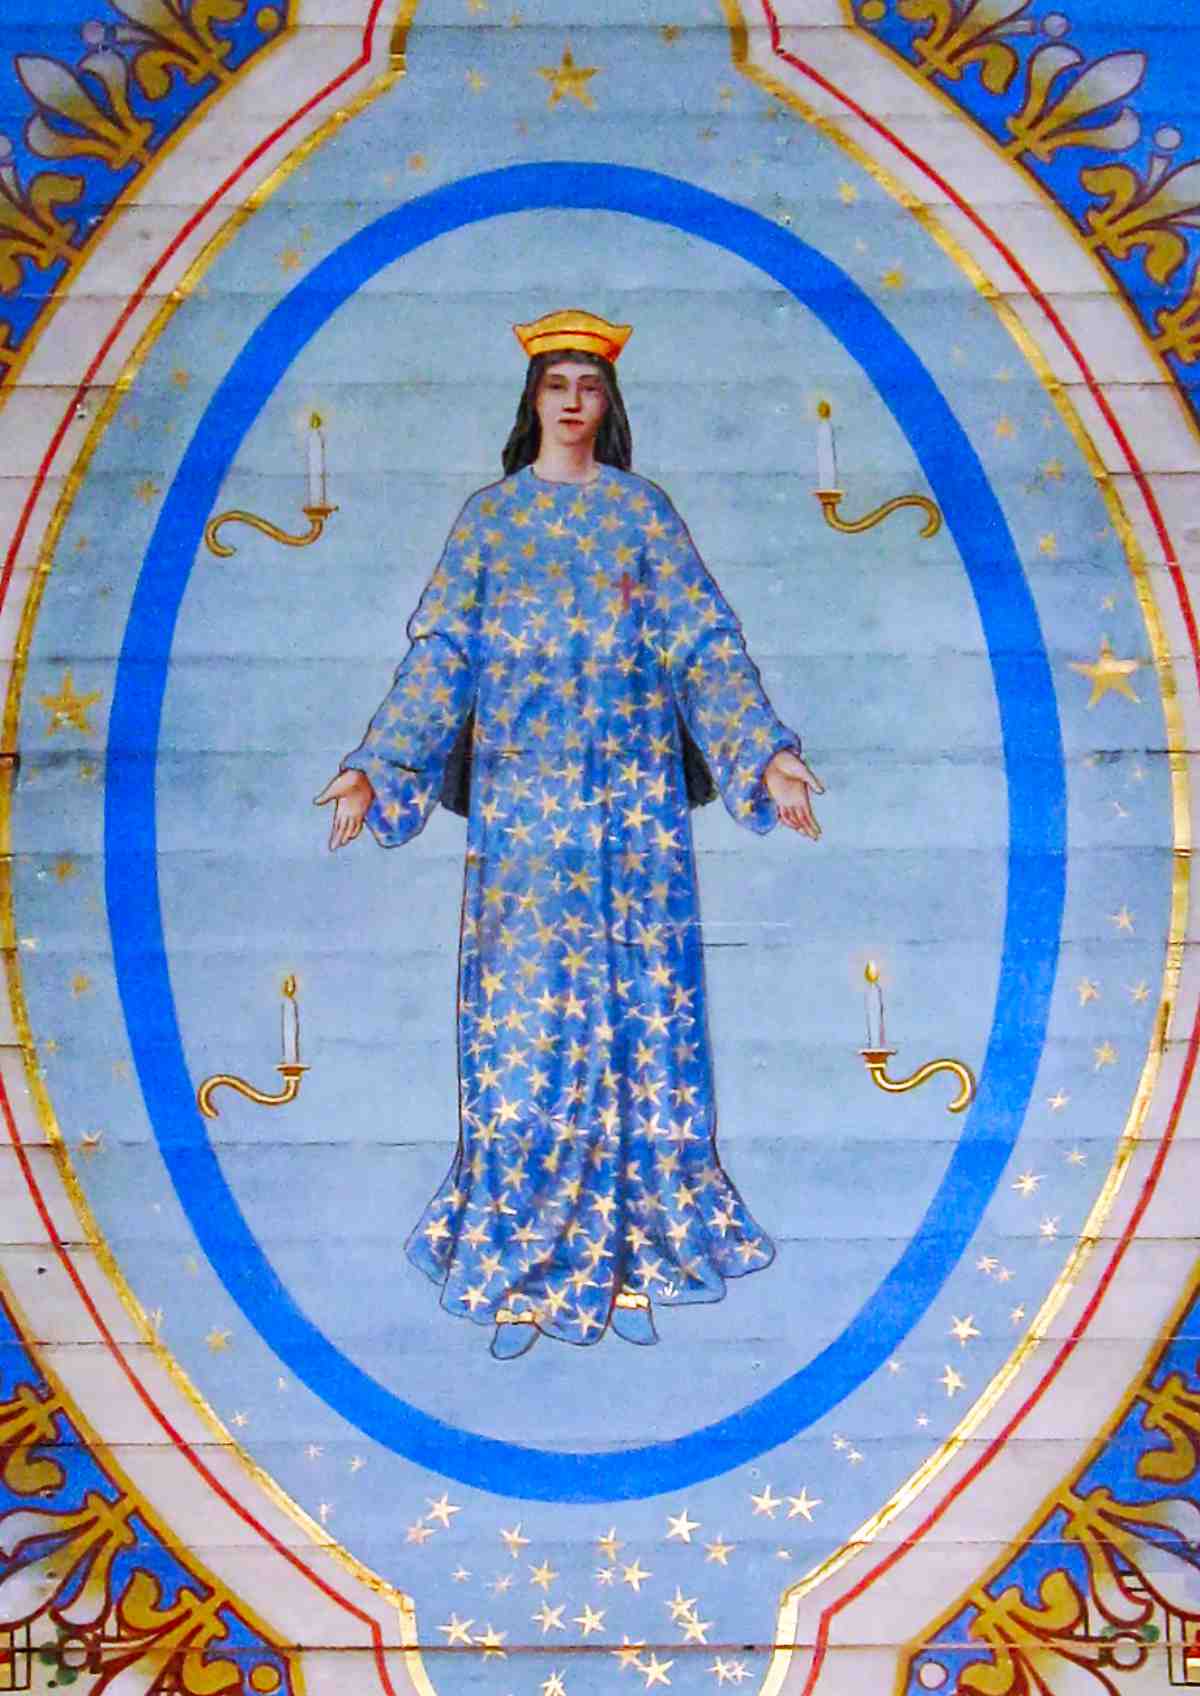 Our Lady of Pontmain, 2nd Phase of Apparition